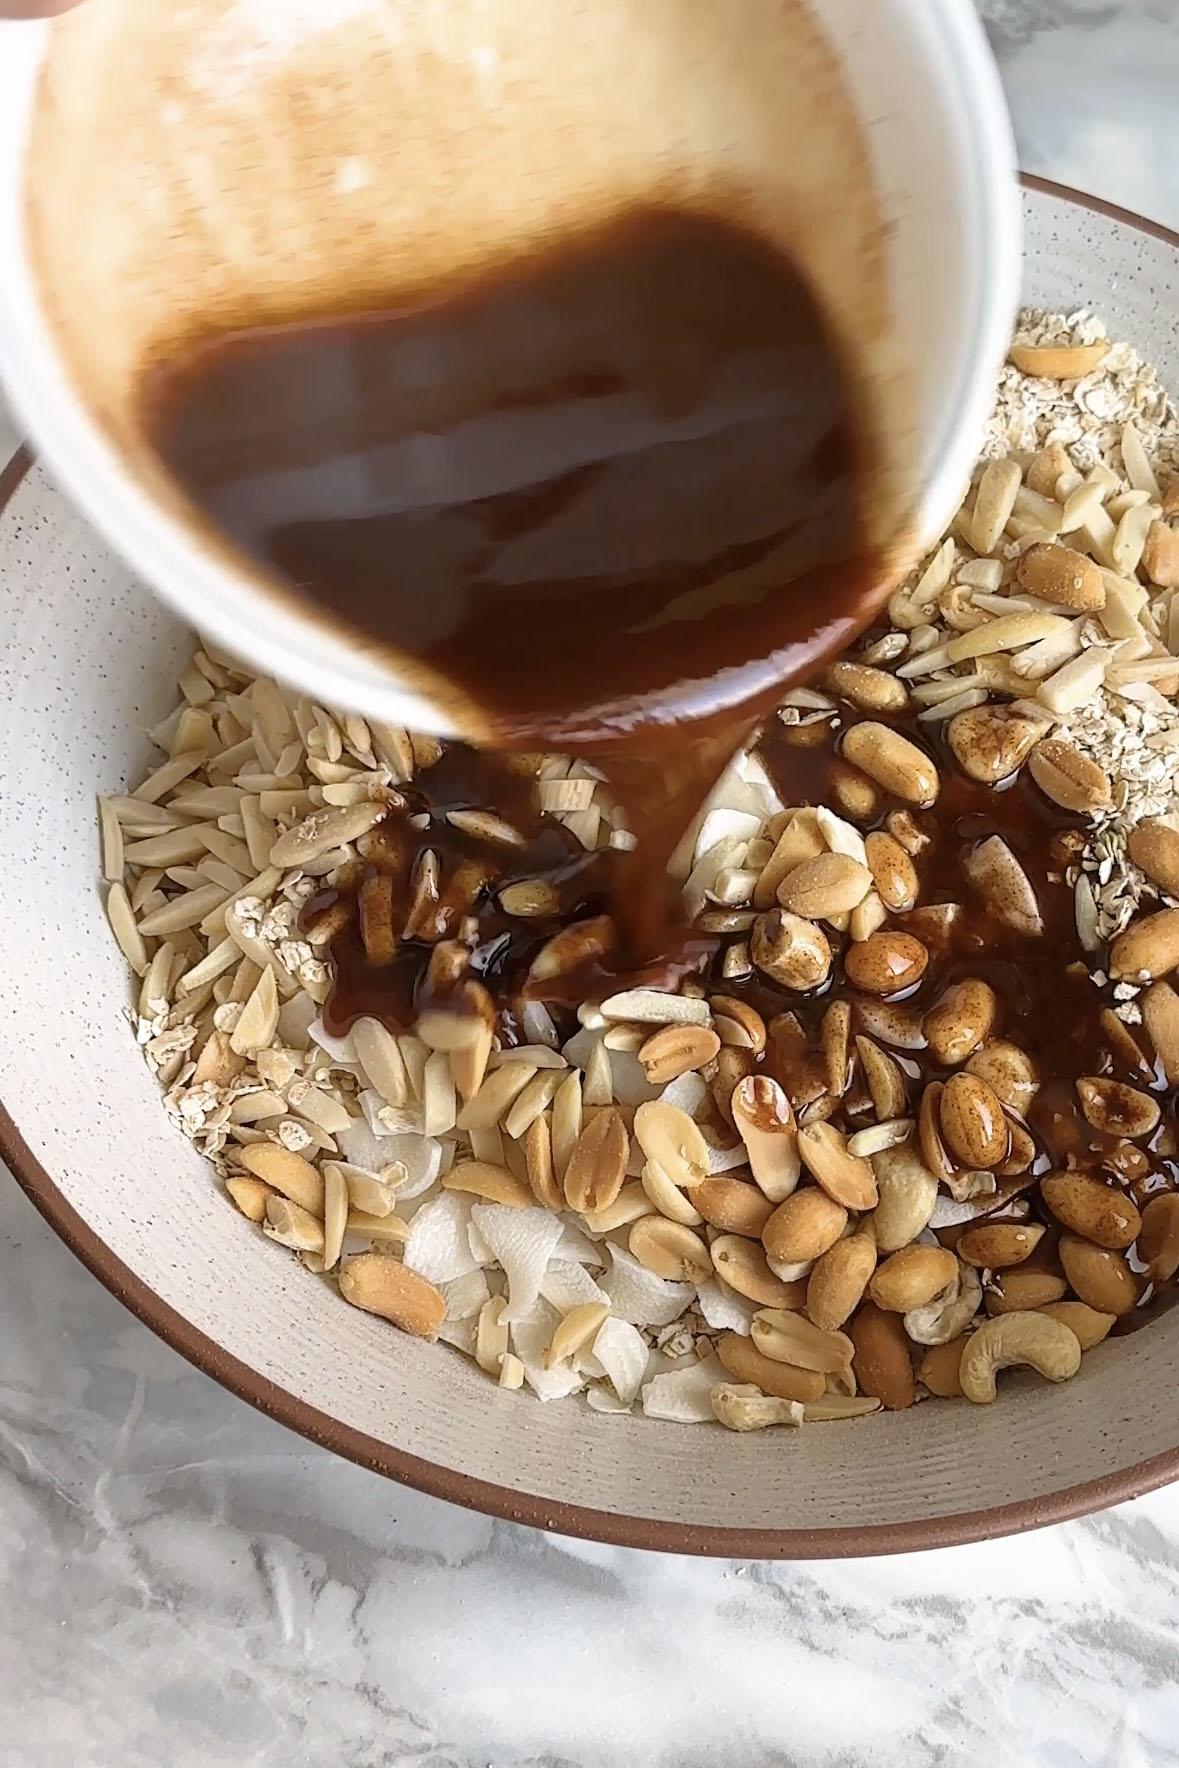 Cinnamon butter is poured onto oats and nuts to make granola.